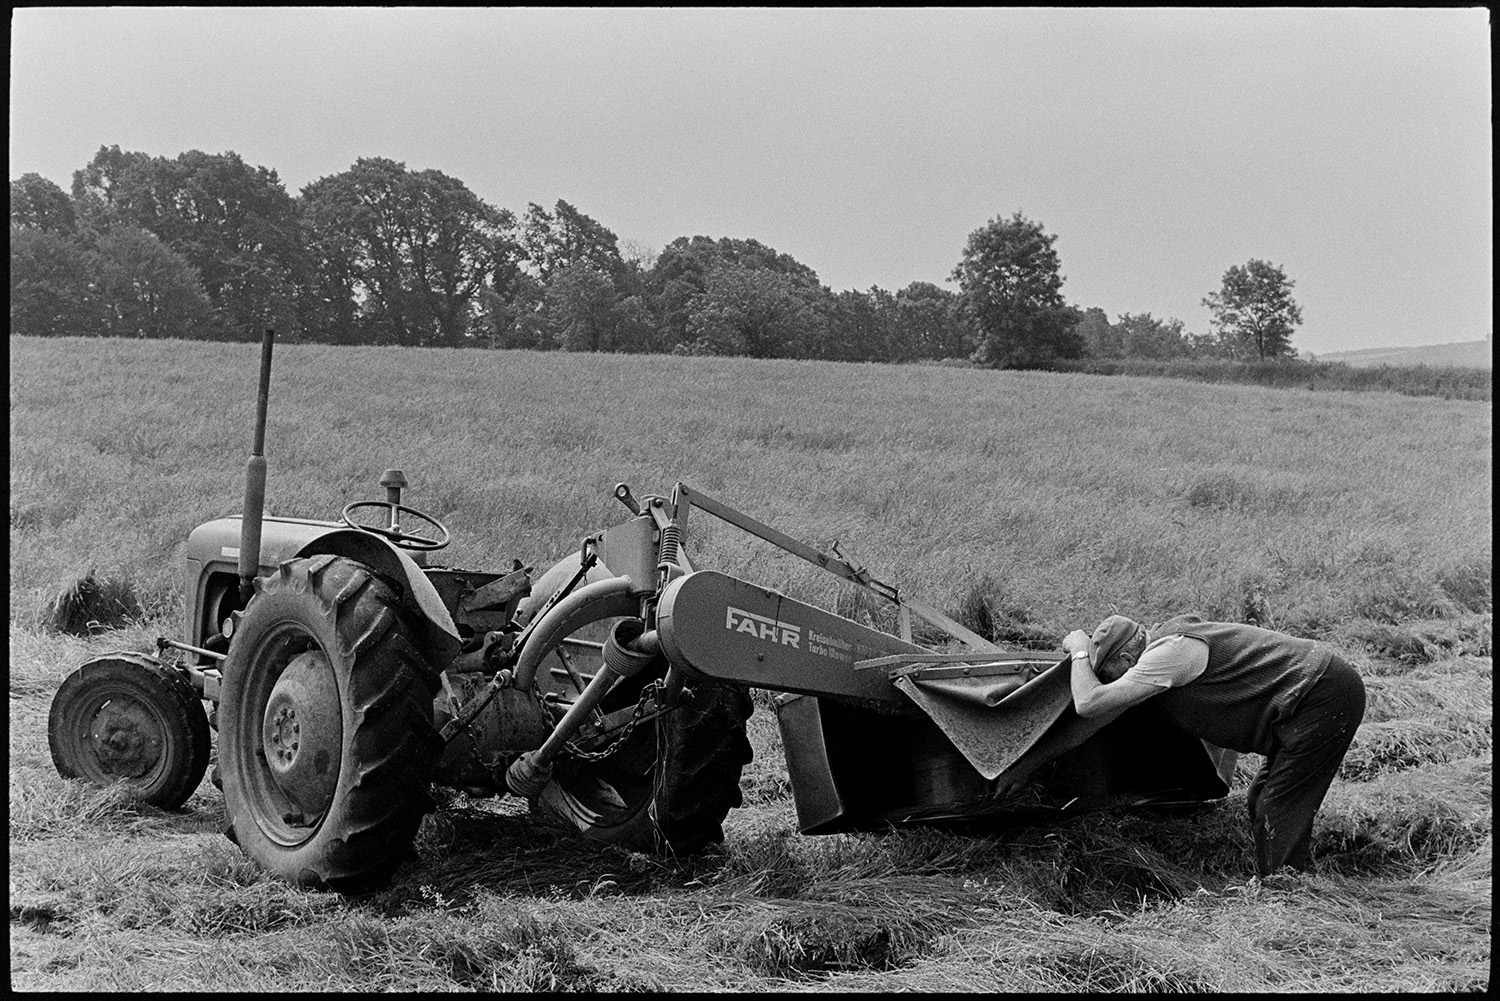 Grass cutter and tractor, farmer checking. 
[John Ward checking a grass cutter and tractor in a field at Parsonage, Iddesleigh.]